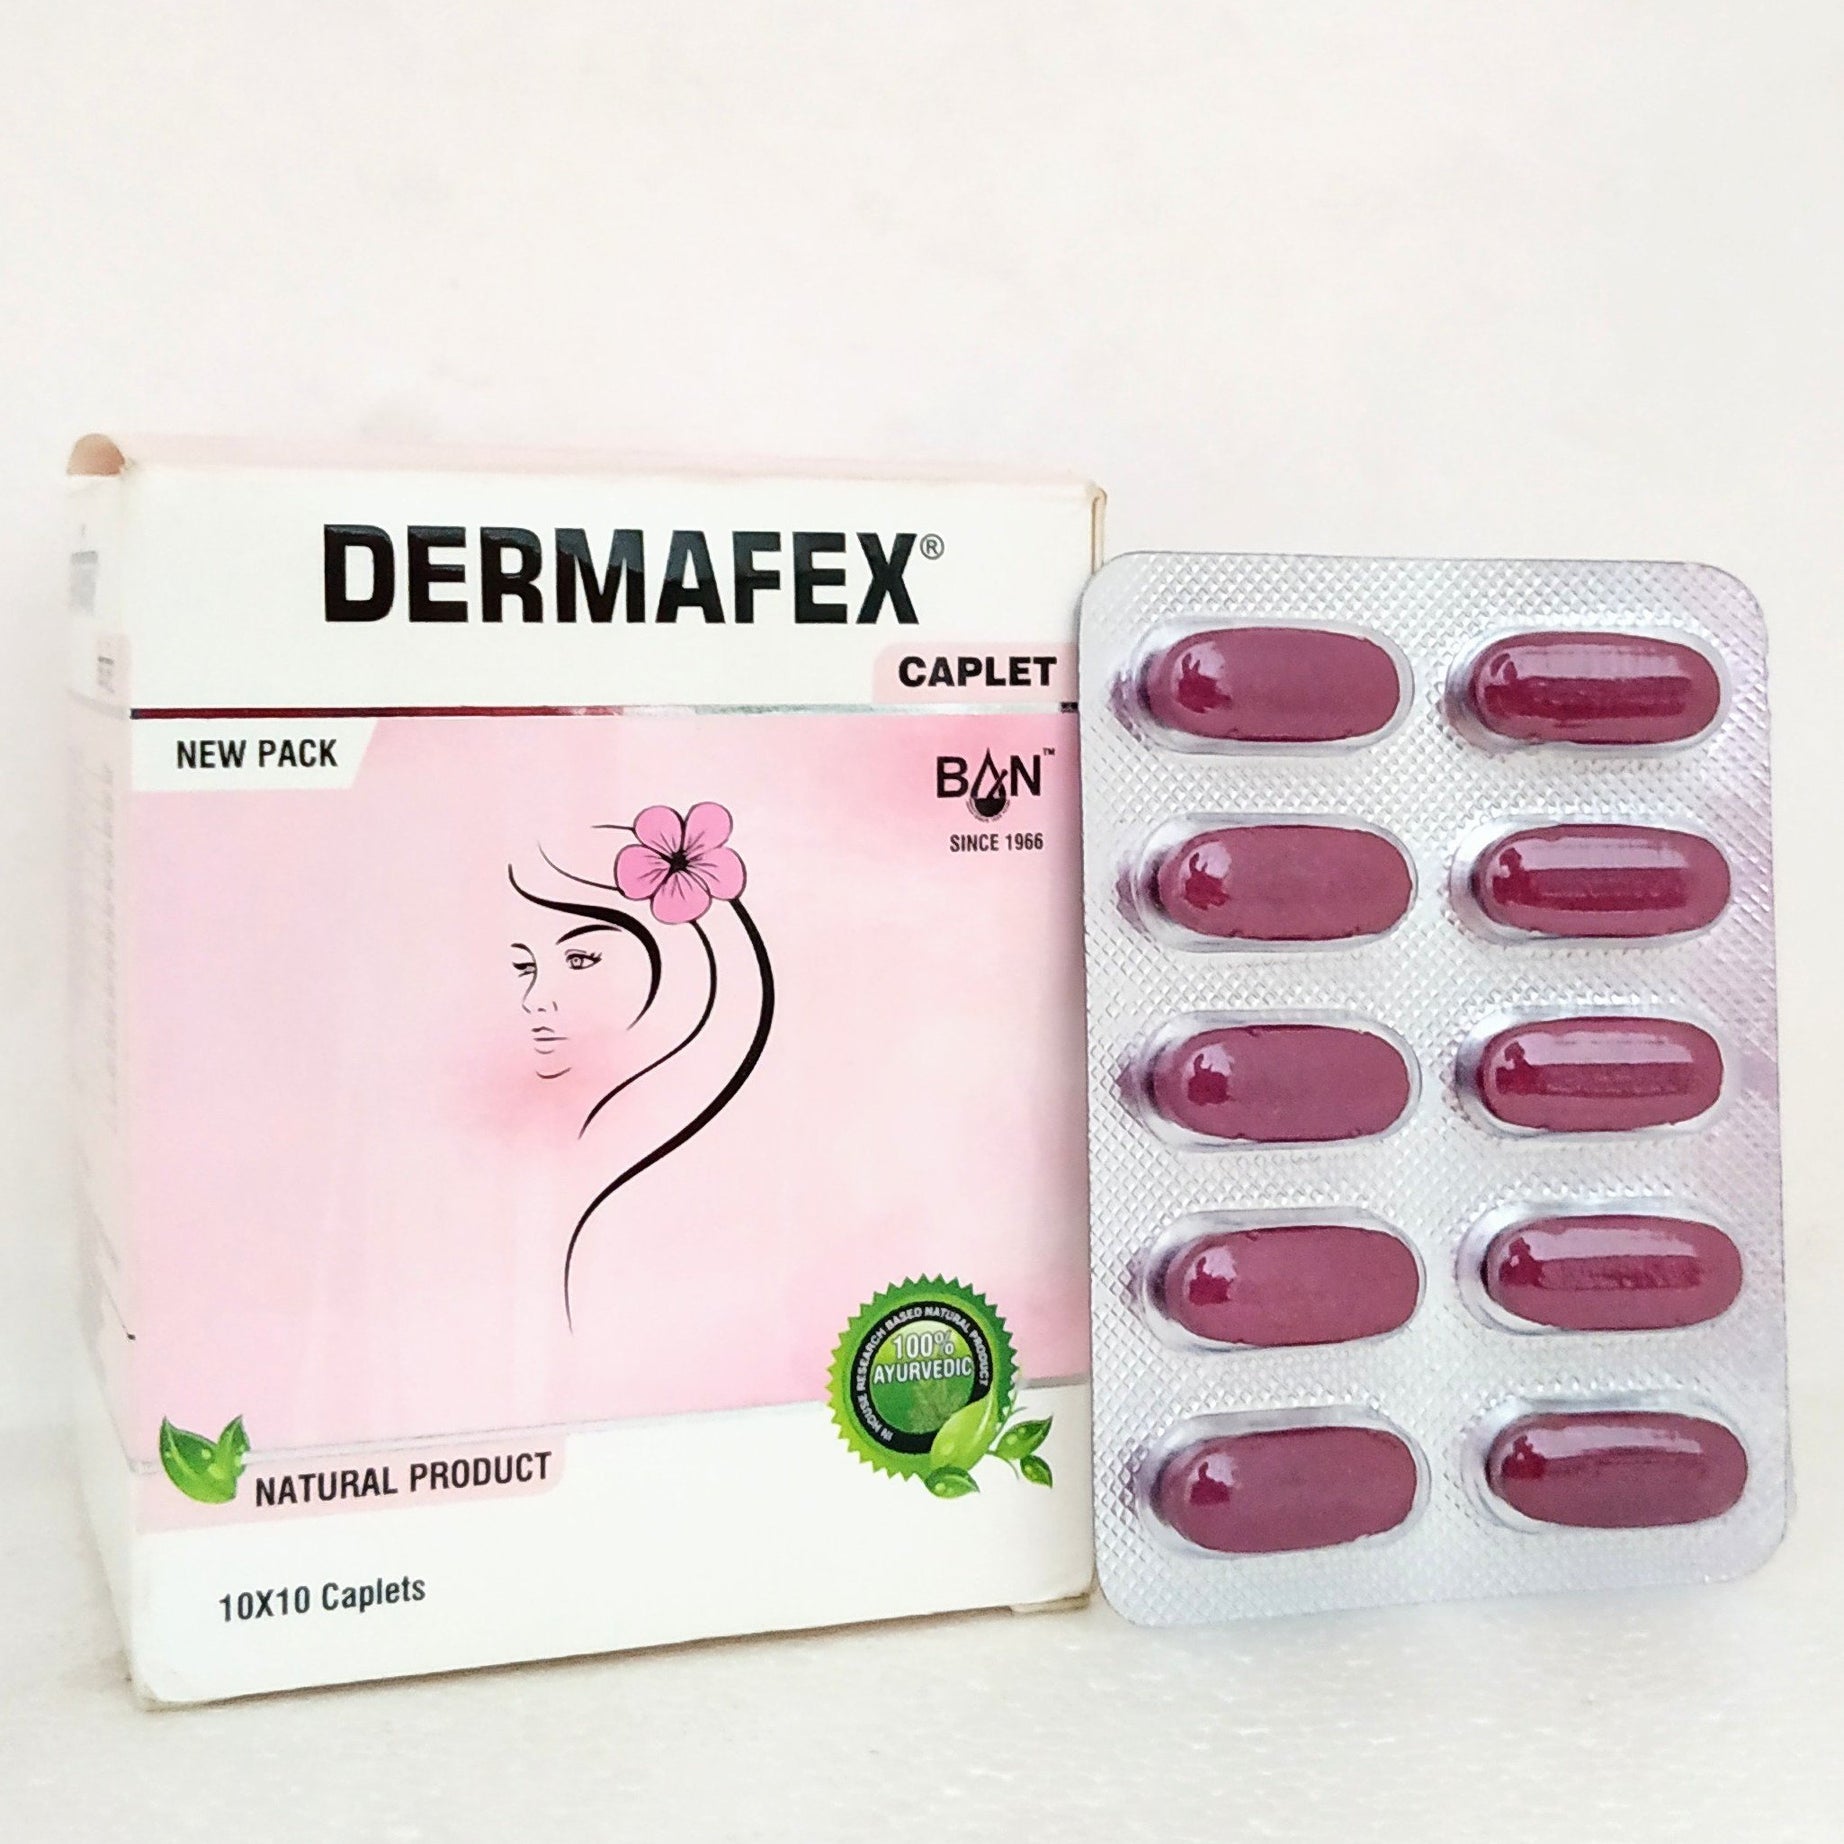 Shop Banlab Dermafex 10Caplets at price 57.50 from Banlabs Online - Ayush Care